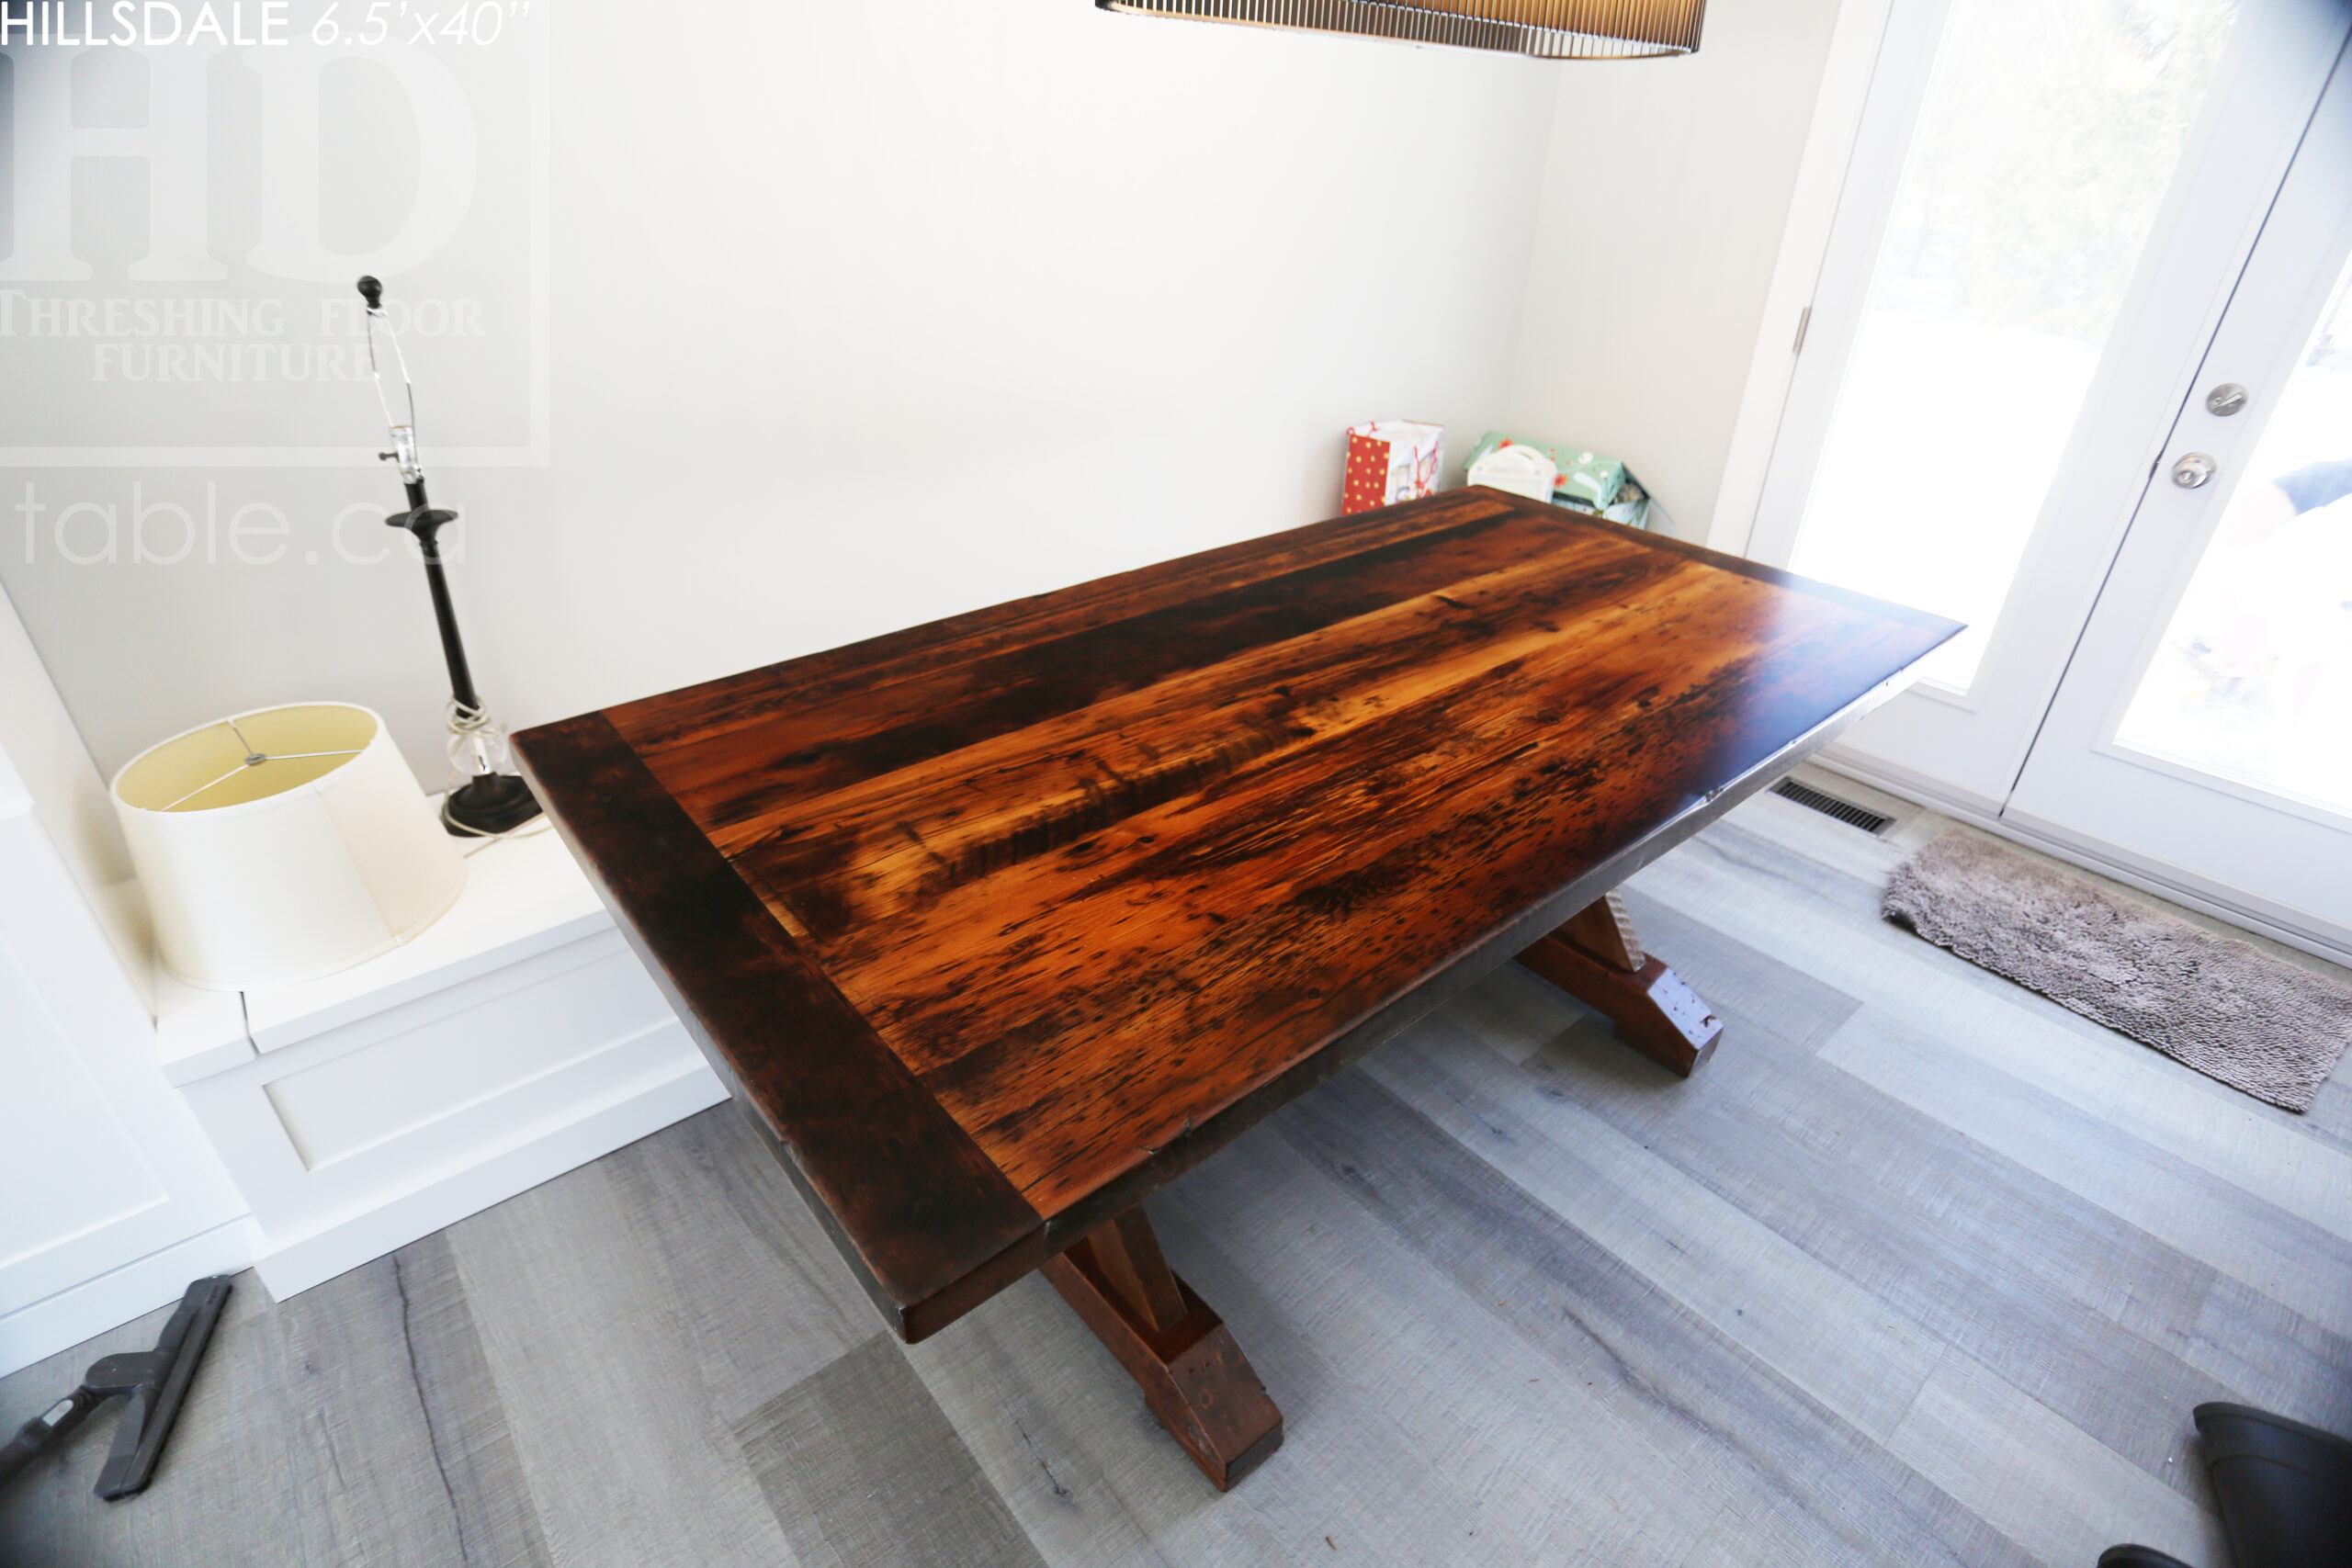 6.5' Reclaimed Wood Table for Hillsdale home - 40" wide - Sawbuck Base - Hemlock Ontario Barnwood Construction - Original edges & distressing maintained - Premium epoxy + matte polyurethane finish / www.table.ca